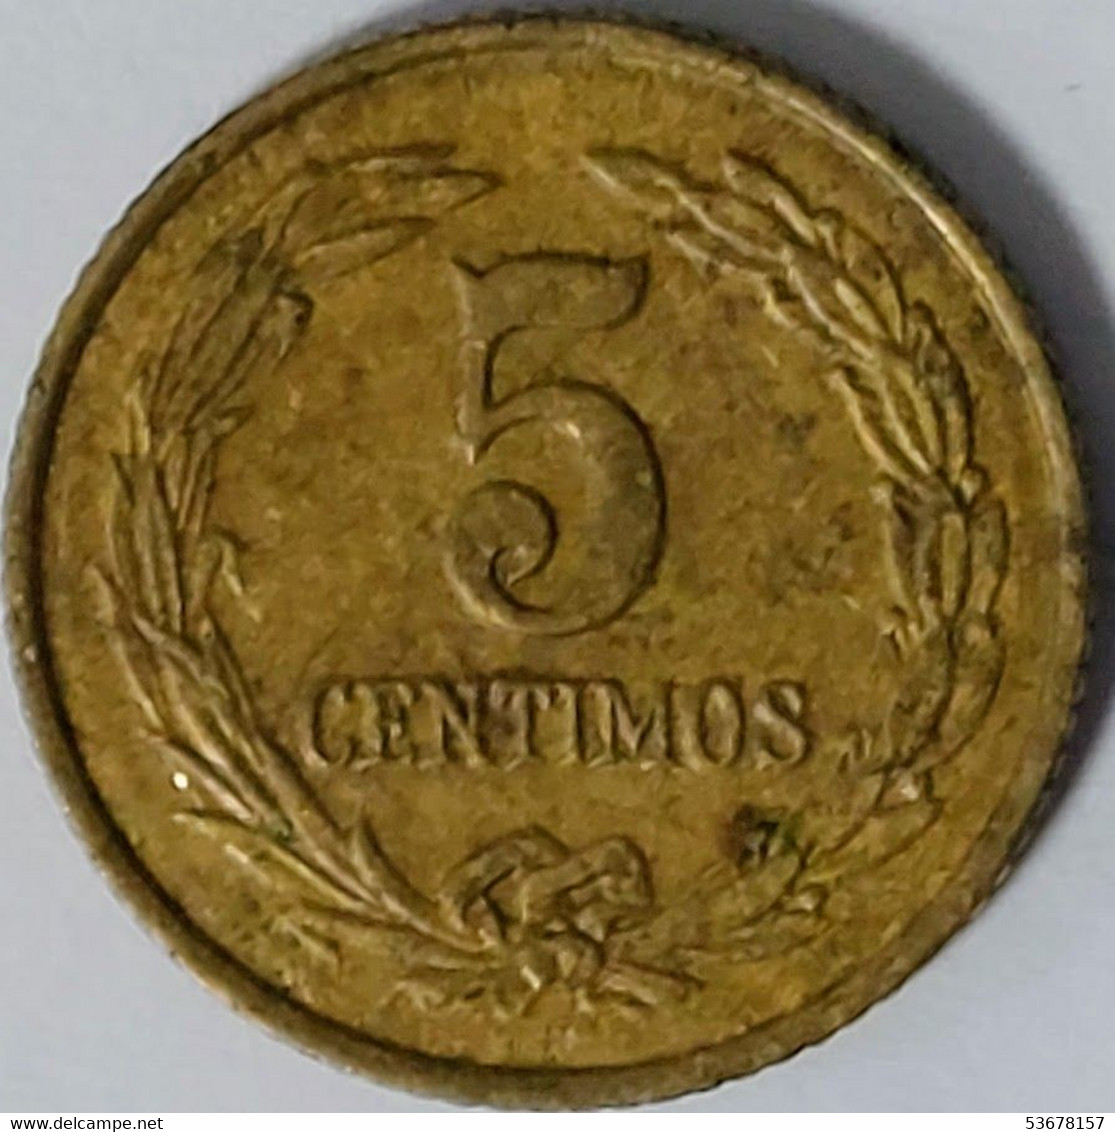 Paraguay - 5 Centimos 1947, KM# 21 (#1955) - Paraguay